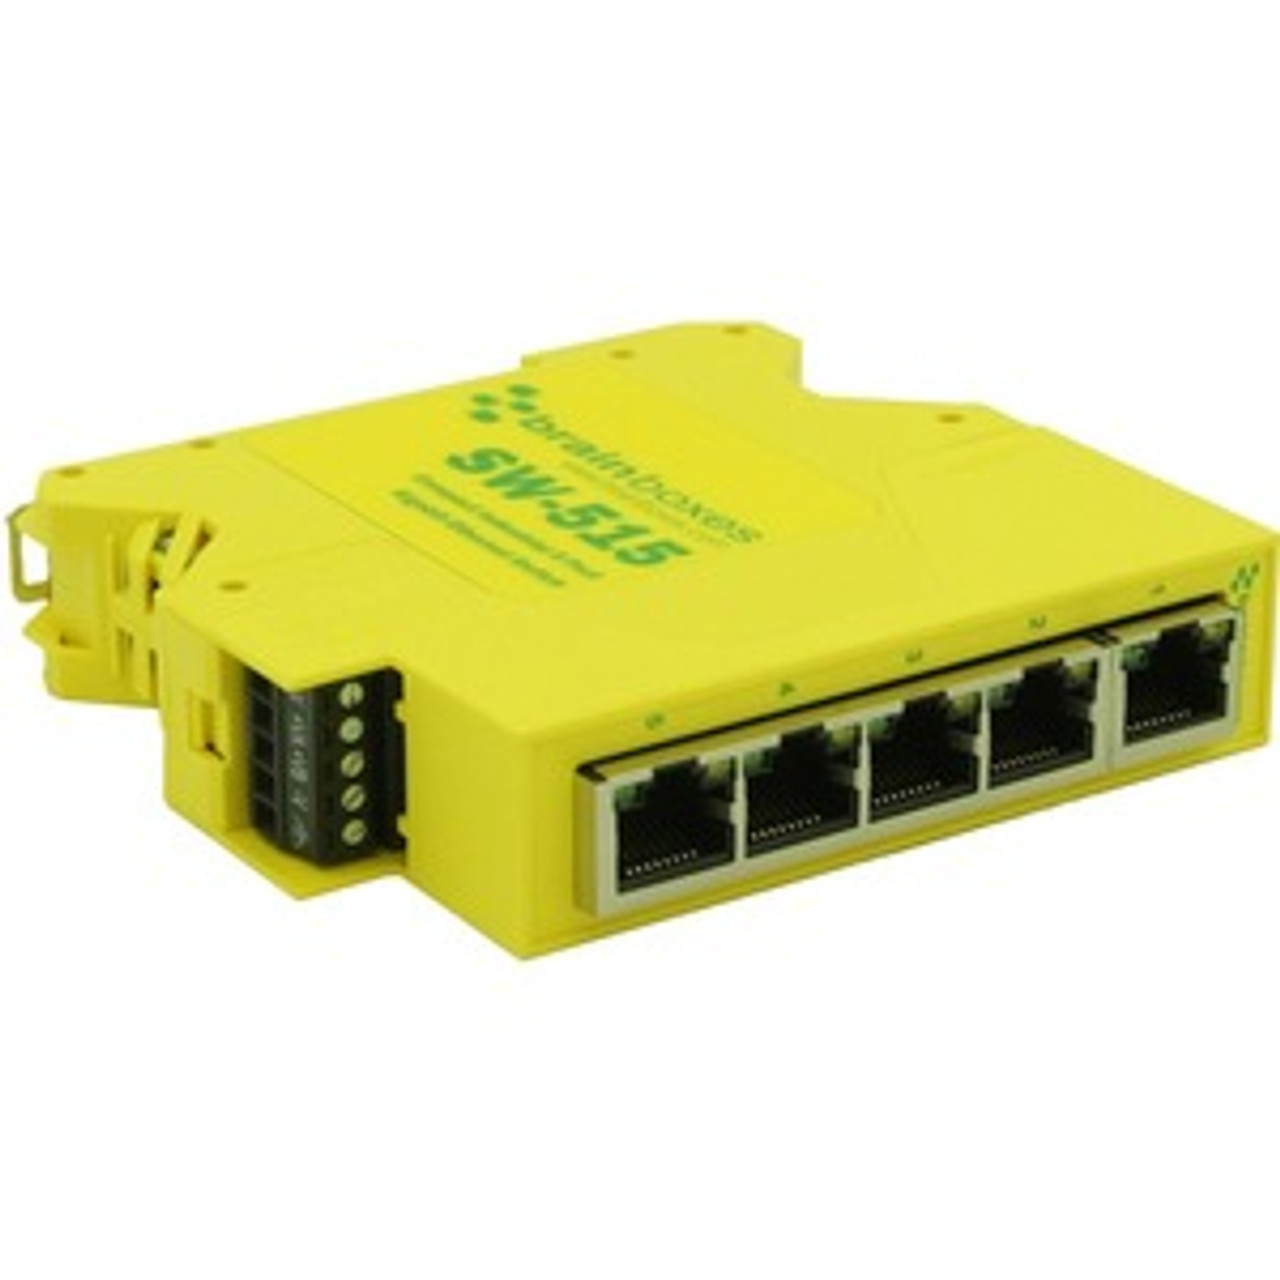 SW-515 Brainboxes Compact Industrial 5 Port Gigabit Ethernet Switch DIN Rail Mountable - 5 Ports - TAA Compliant - 2 Layer Supported - Twisted Pair - DIN